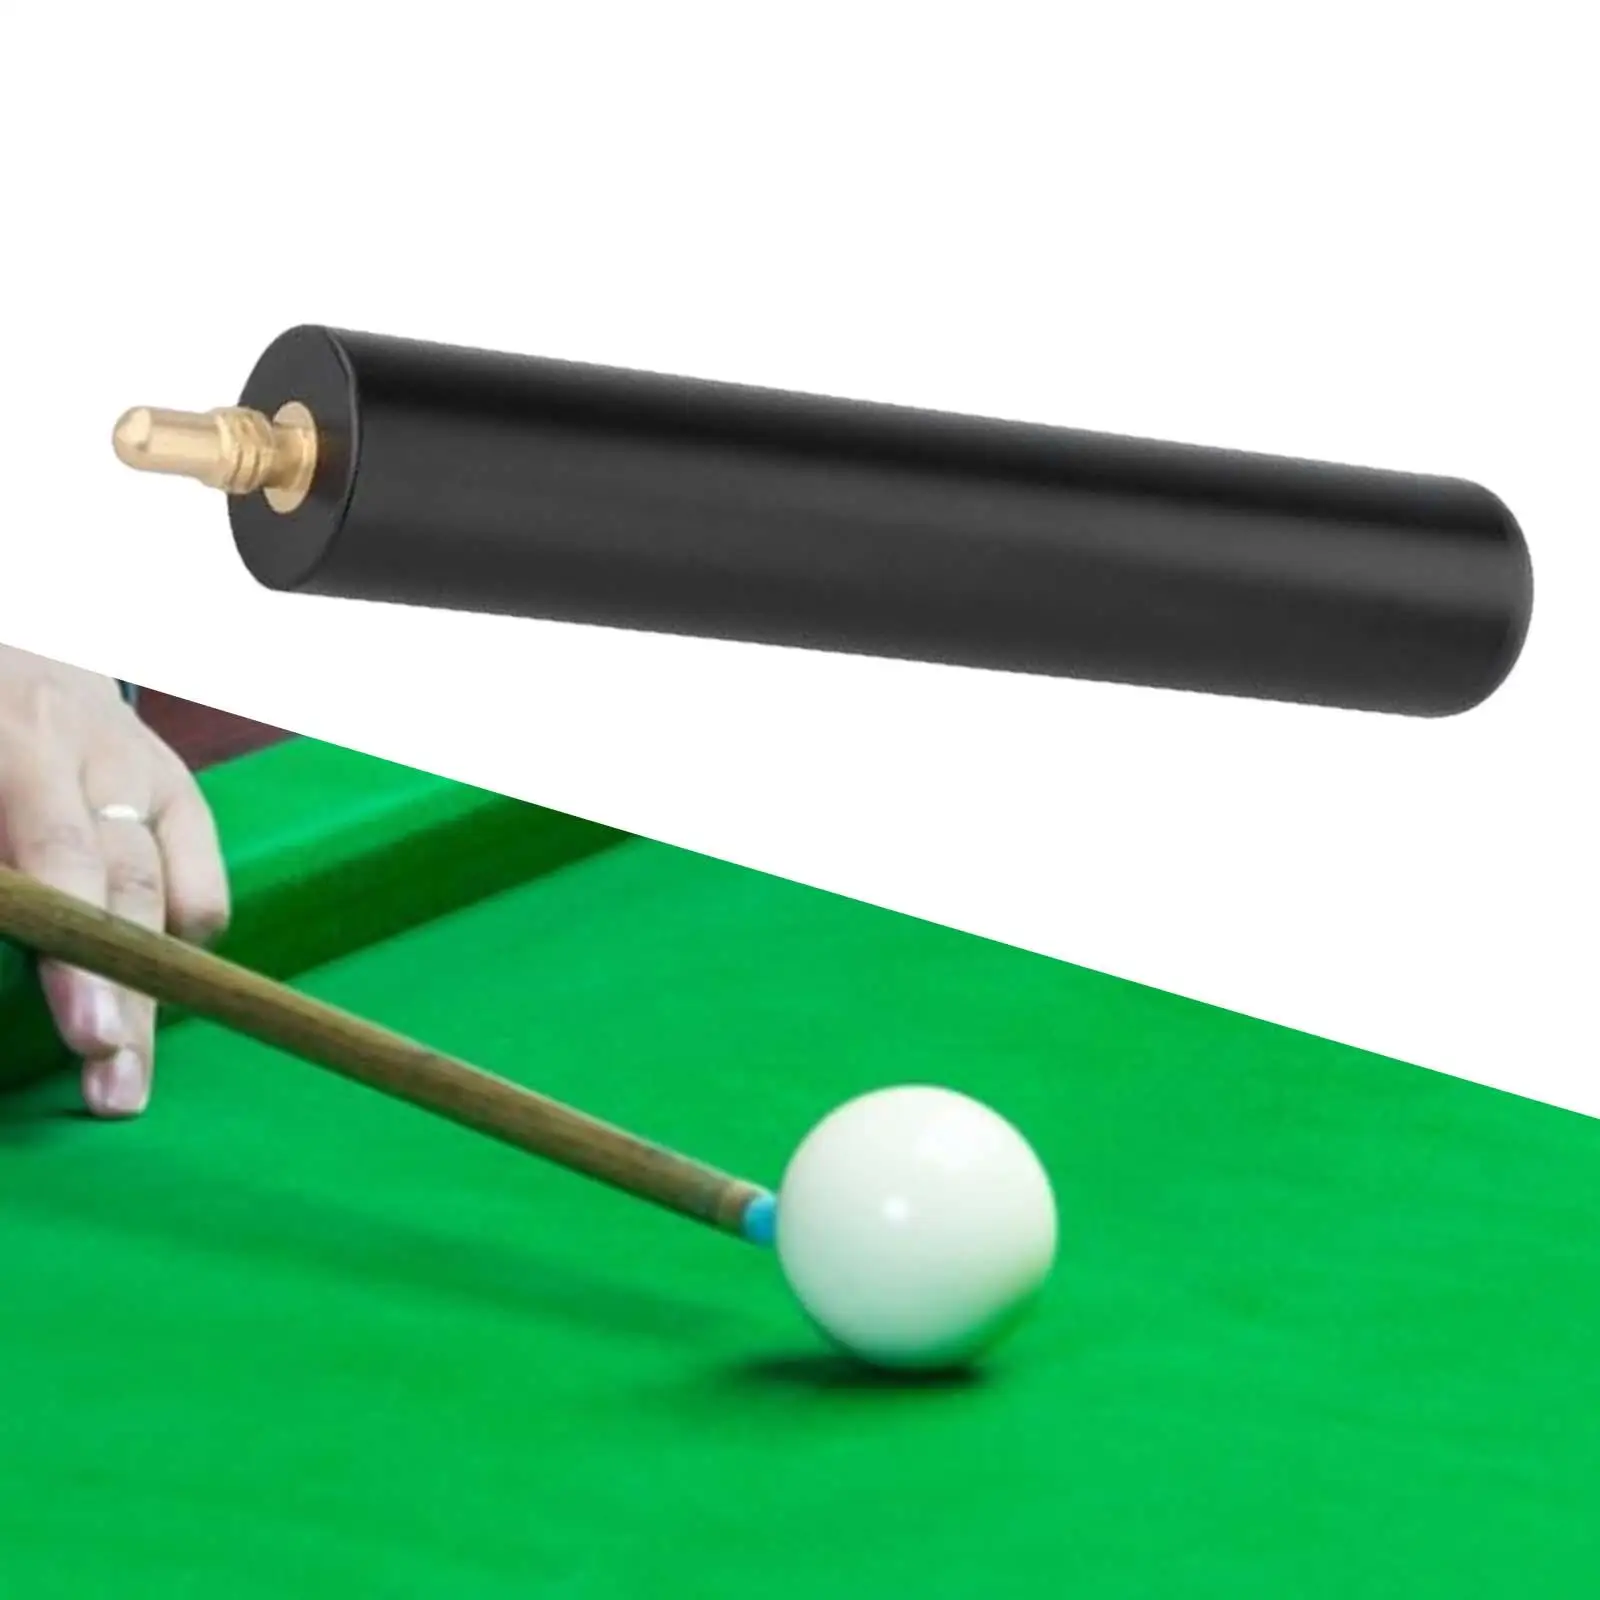 Portable Cue Stick Extender Weights Replacement 6in Billiards Pool Cue Extension for Billiard Cues